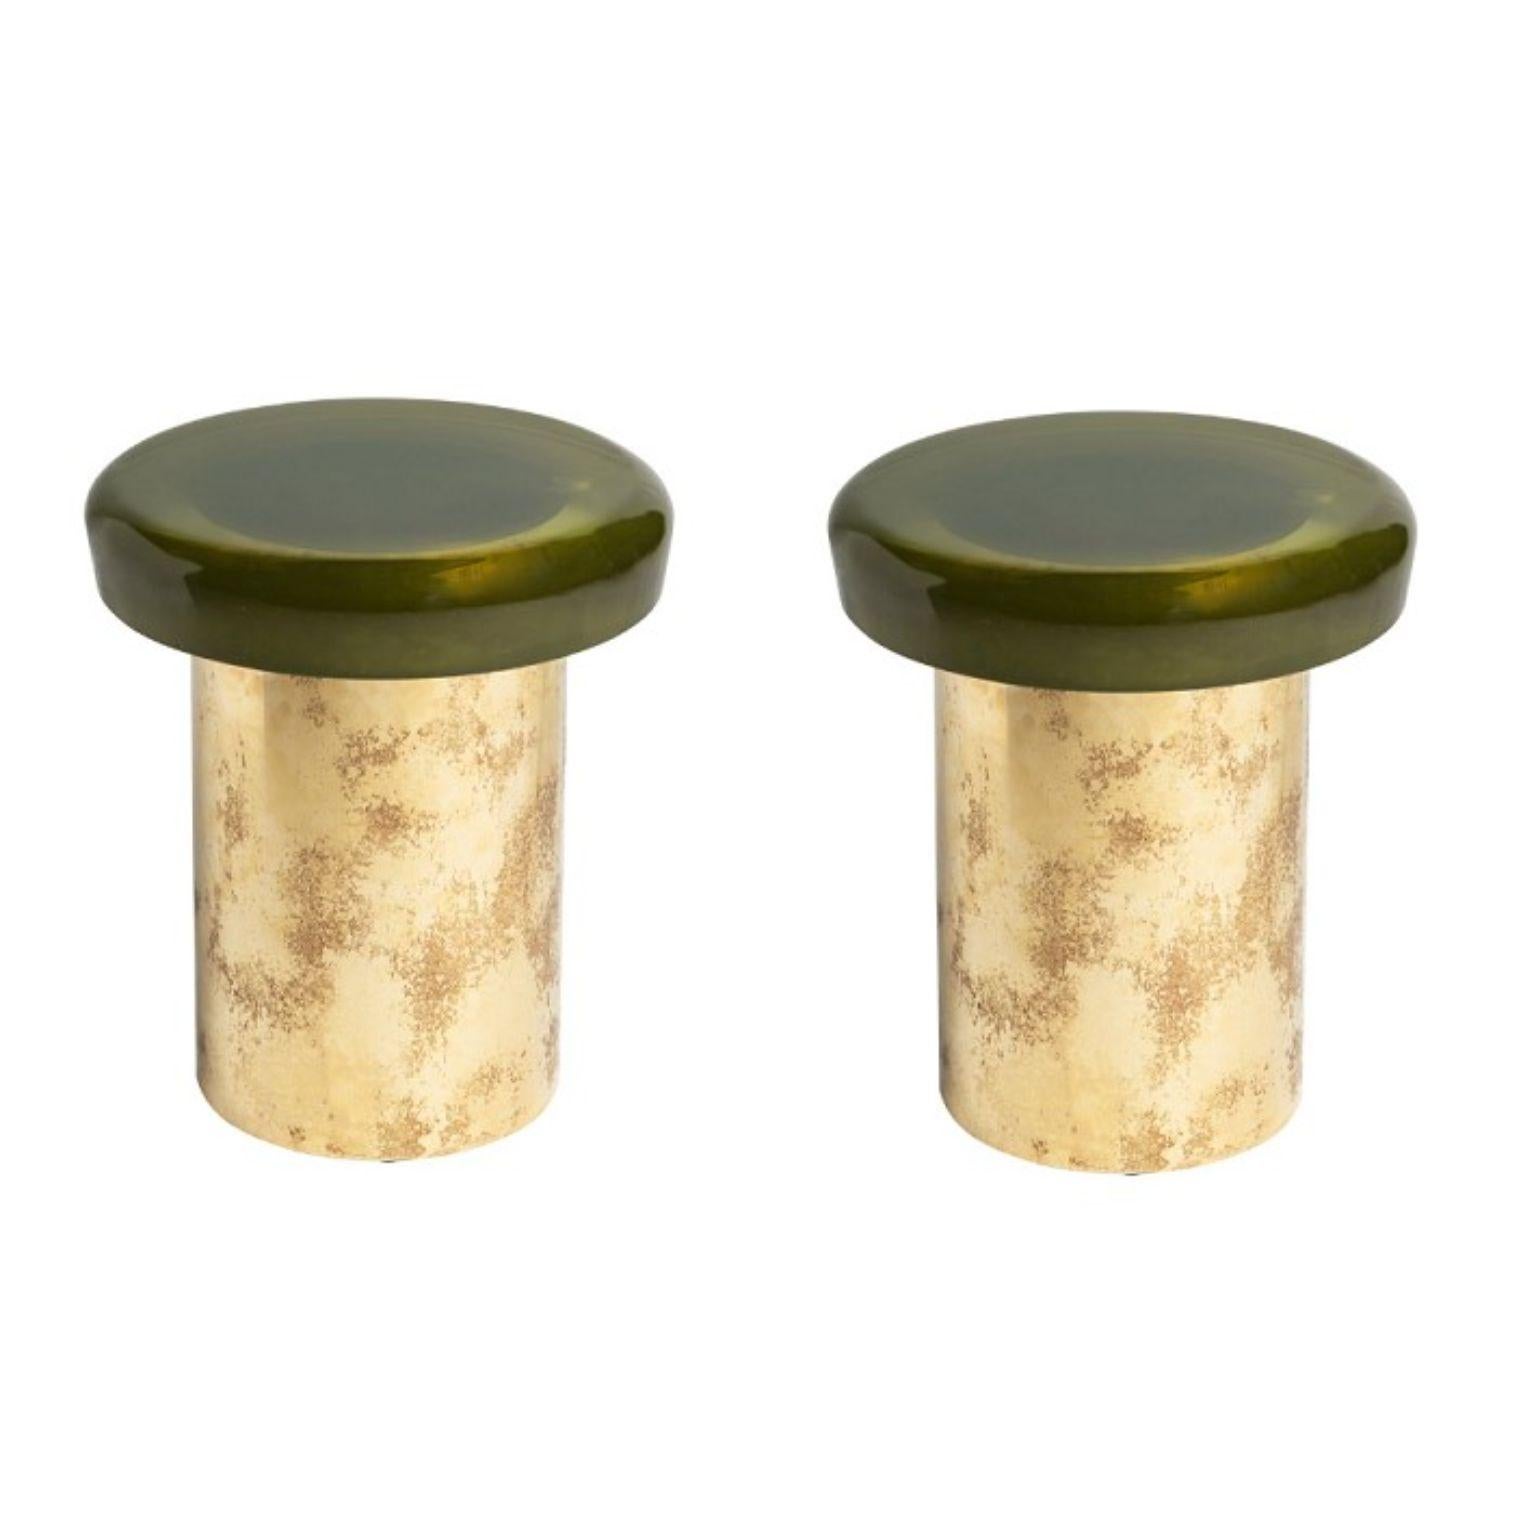 Set of 2 jade stools by Draga & Aurel
Dimensions: W 40, D 40, H 46, top Ø 40 cm
Materials: Resin and bronze

Formed from a combination of reflective resin and solid brass, the Jade coffee tables look like precious gems. The surface is made by